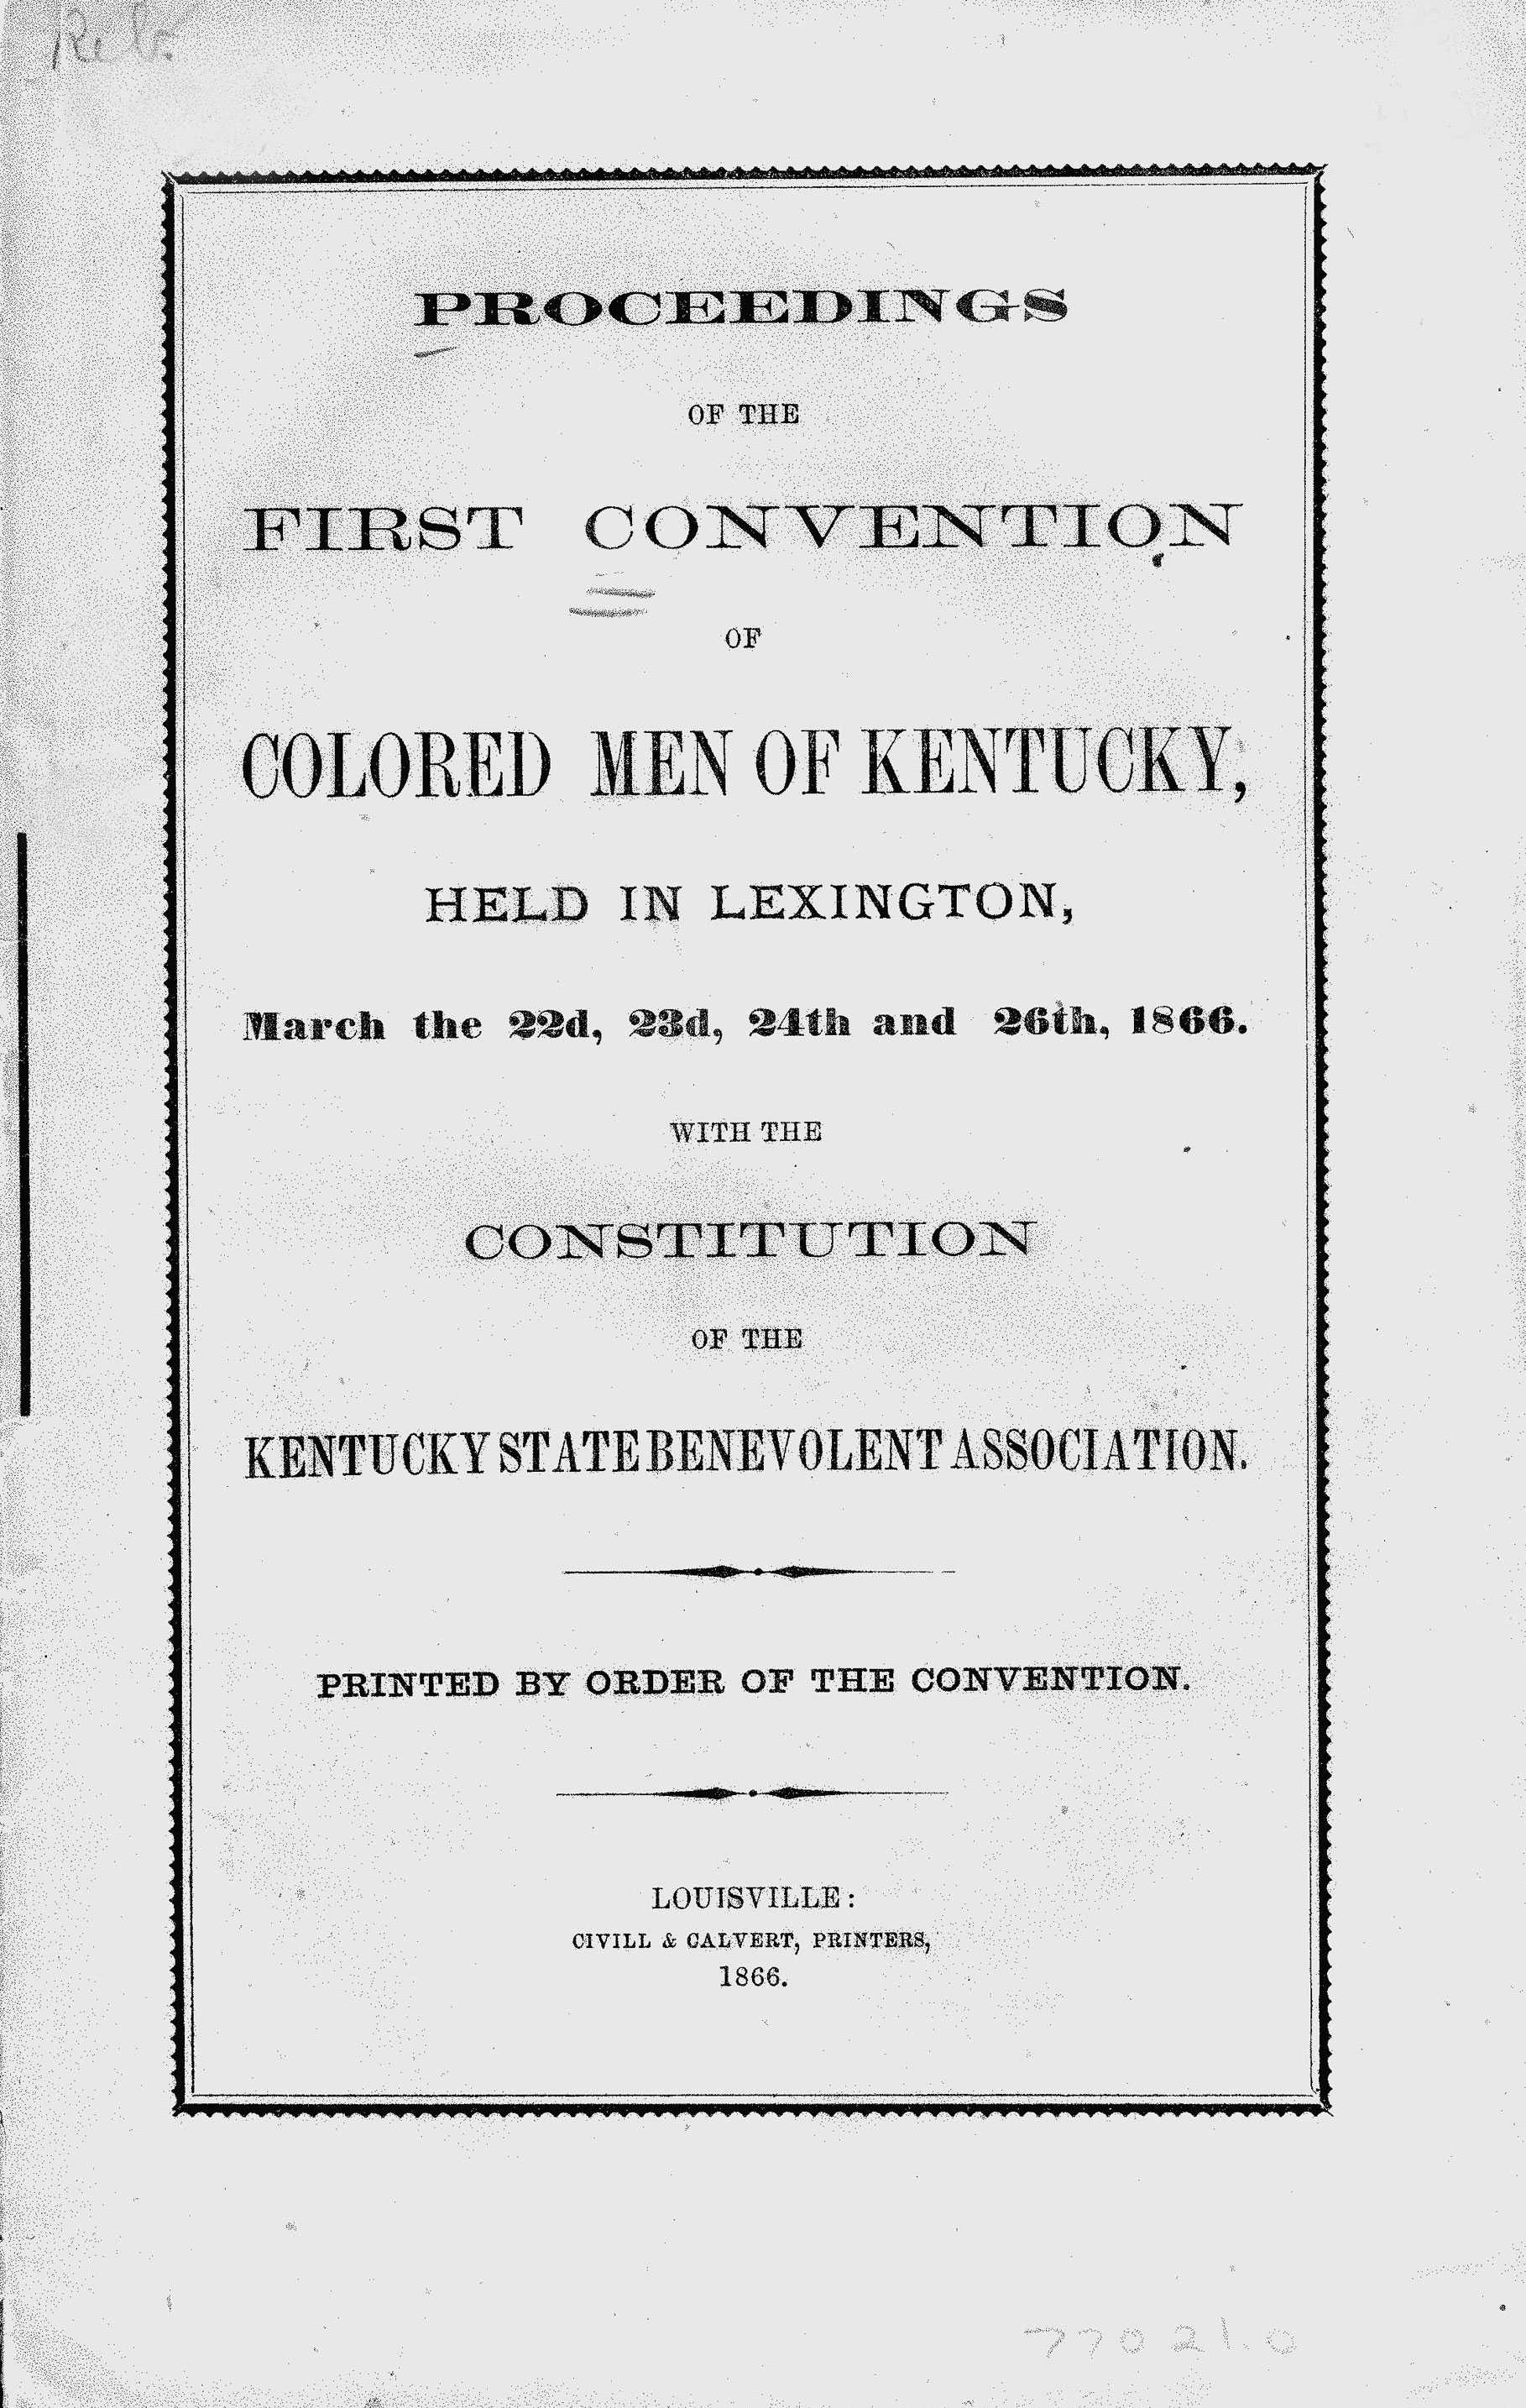 A white paper with Proceedings of the First Conventions of Colored Men held in Lexington, KY.